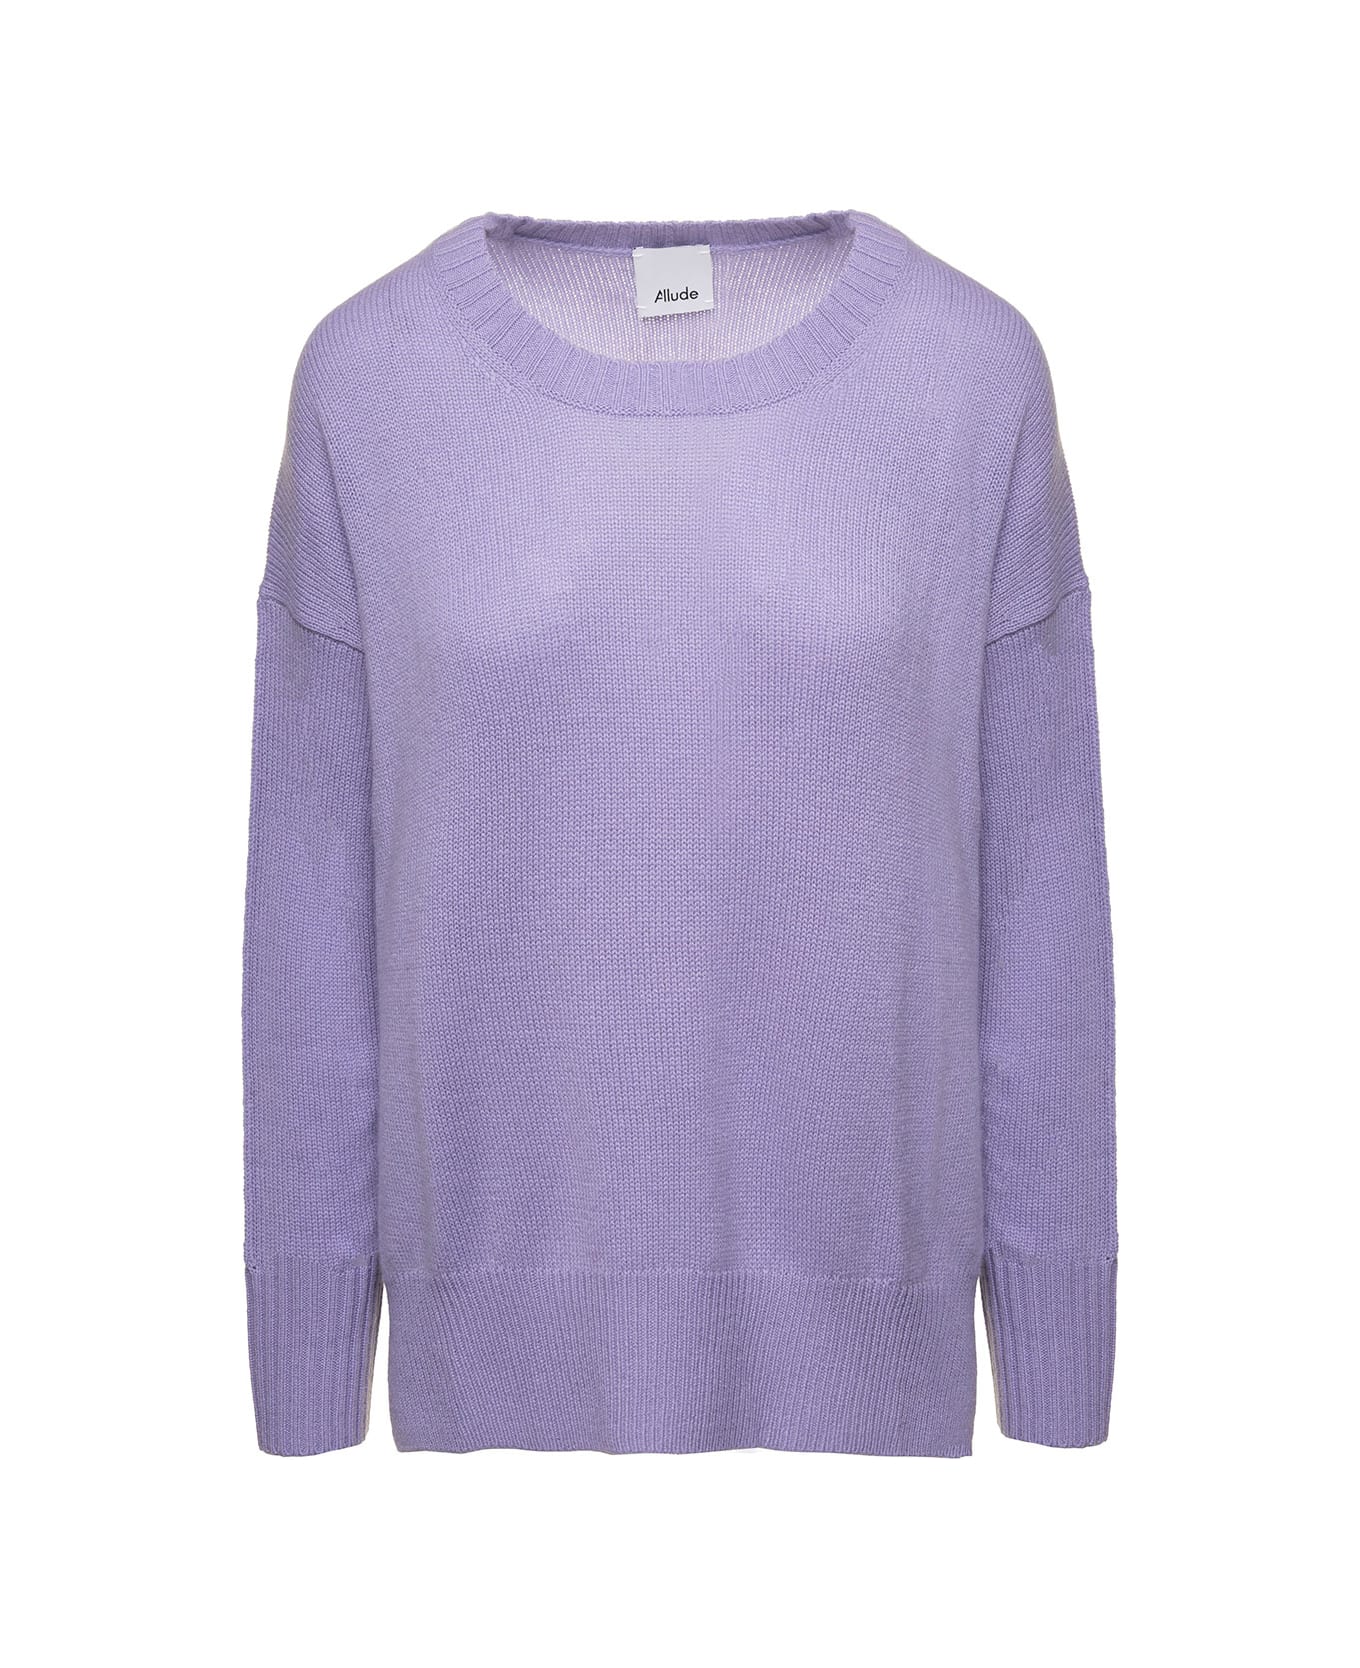 Allude Purple Sweater With U Neckline In Cashmere Woman - Violet